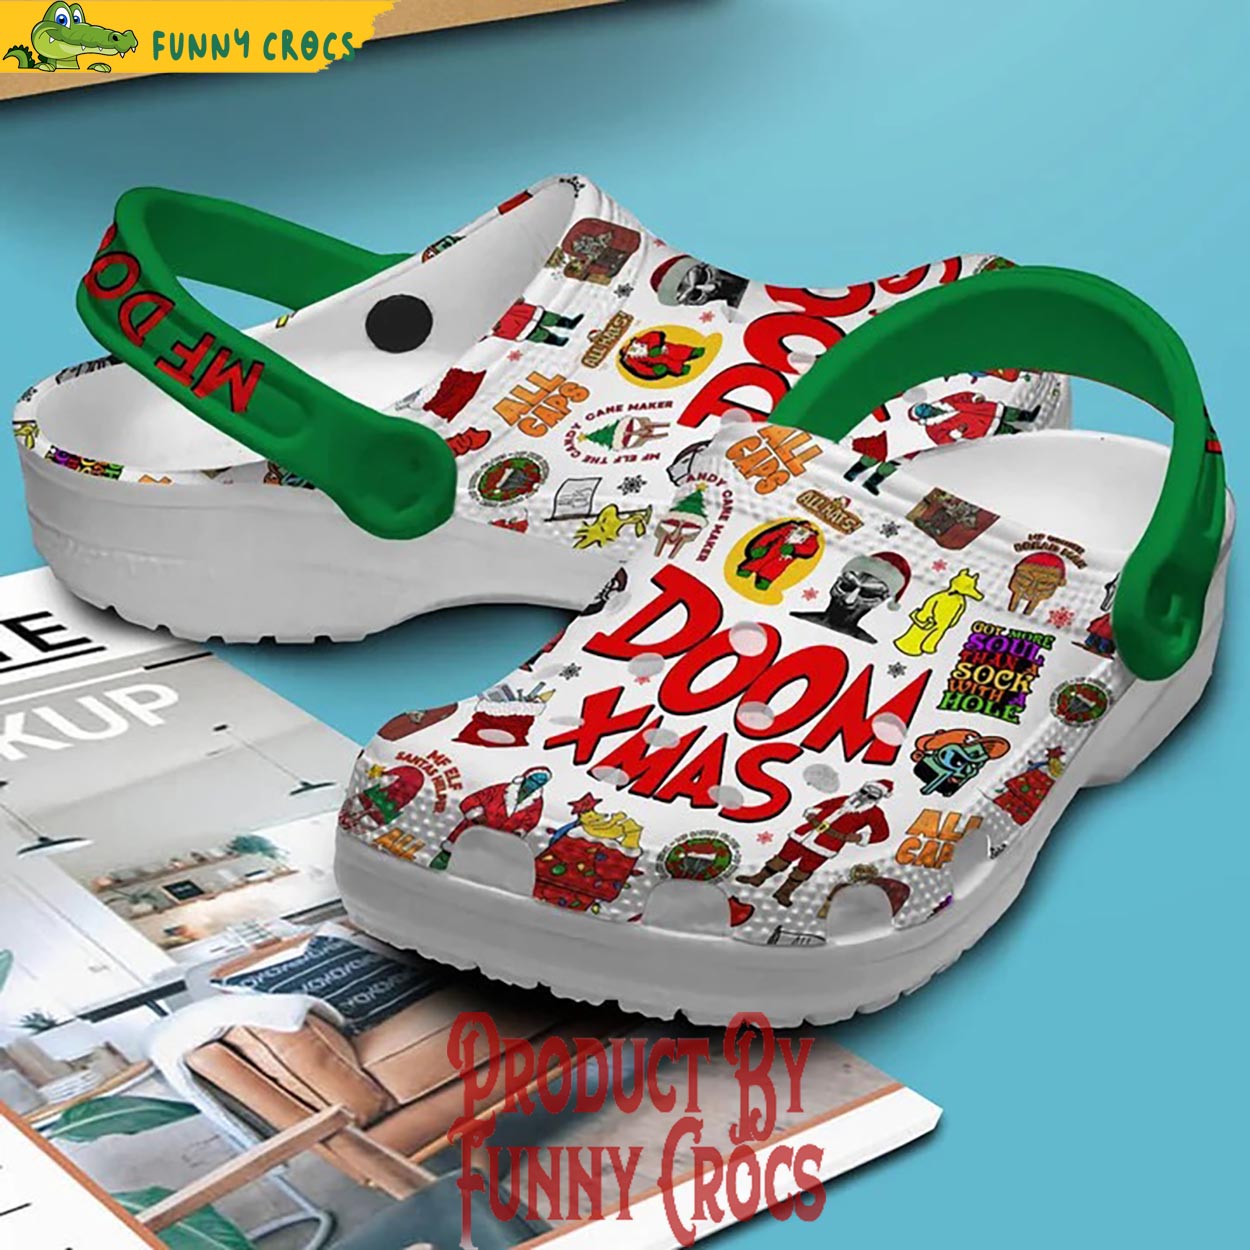 MF Doom Xmas Crocs Shoes - Discover Comfort And Style Clog Shoes With ...